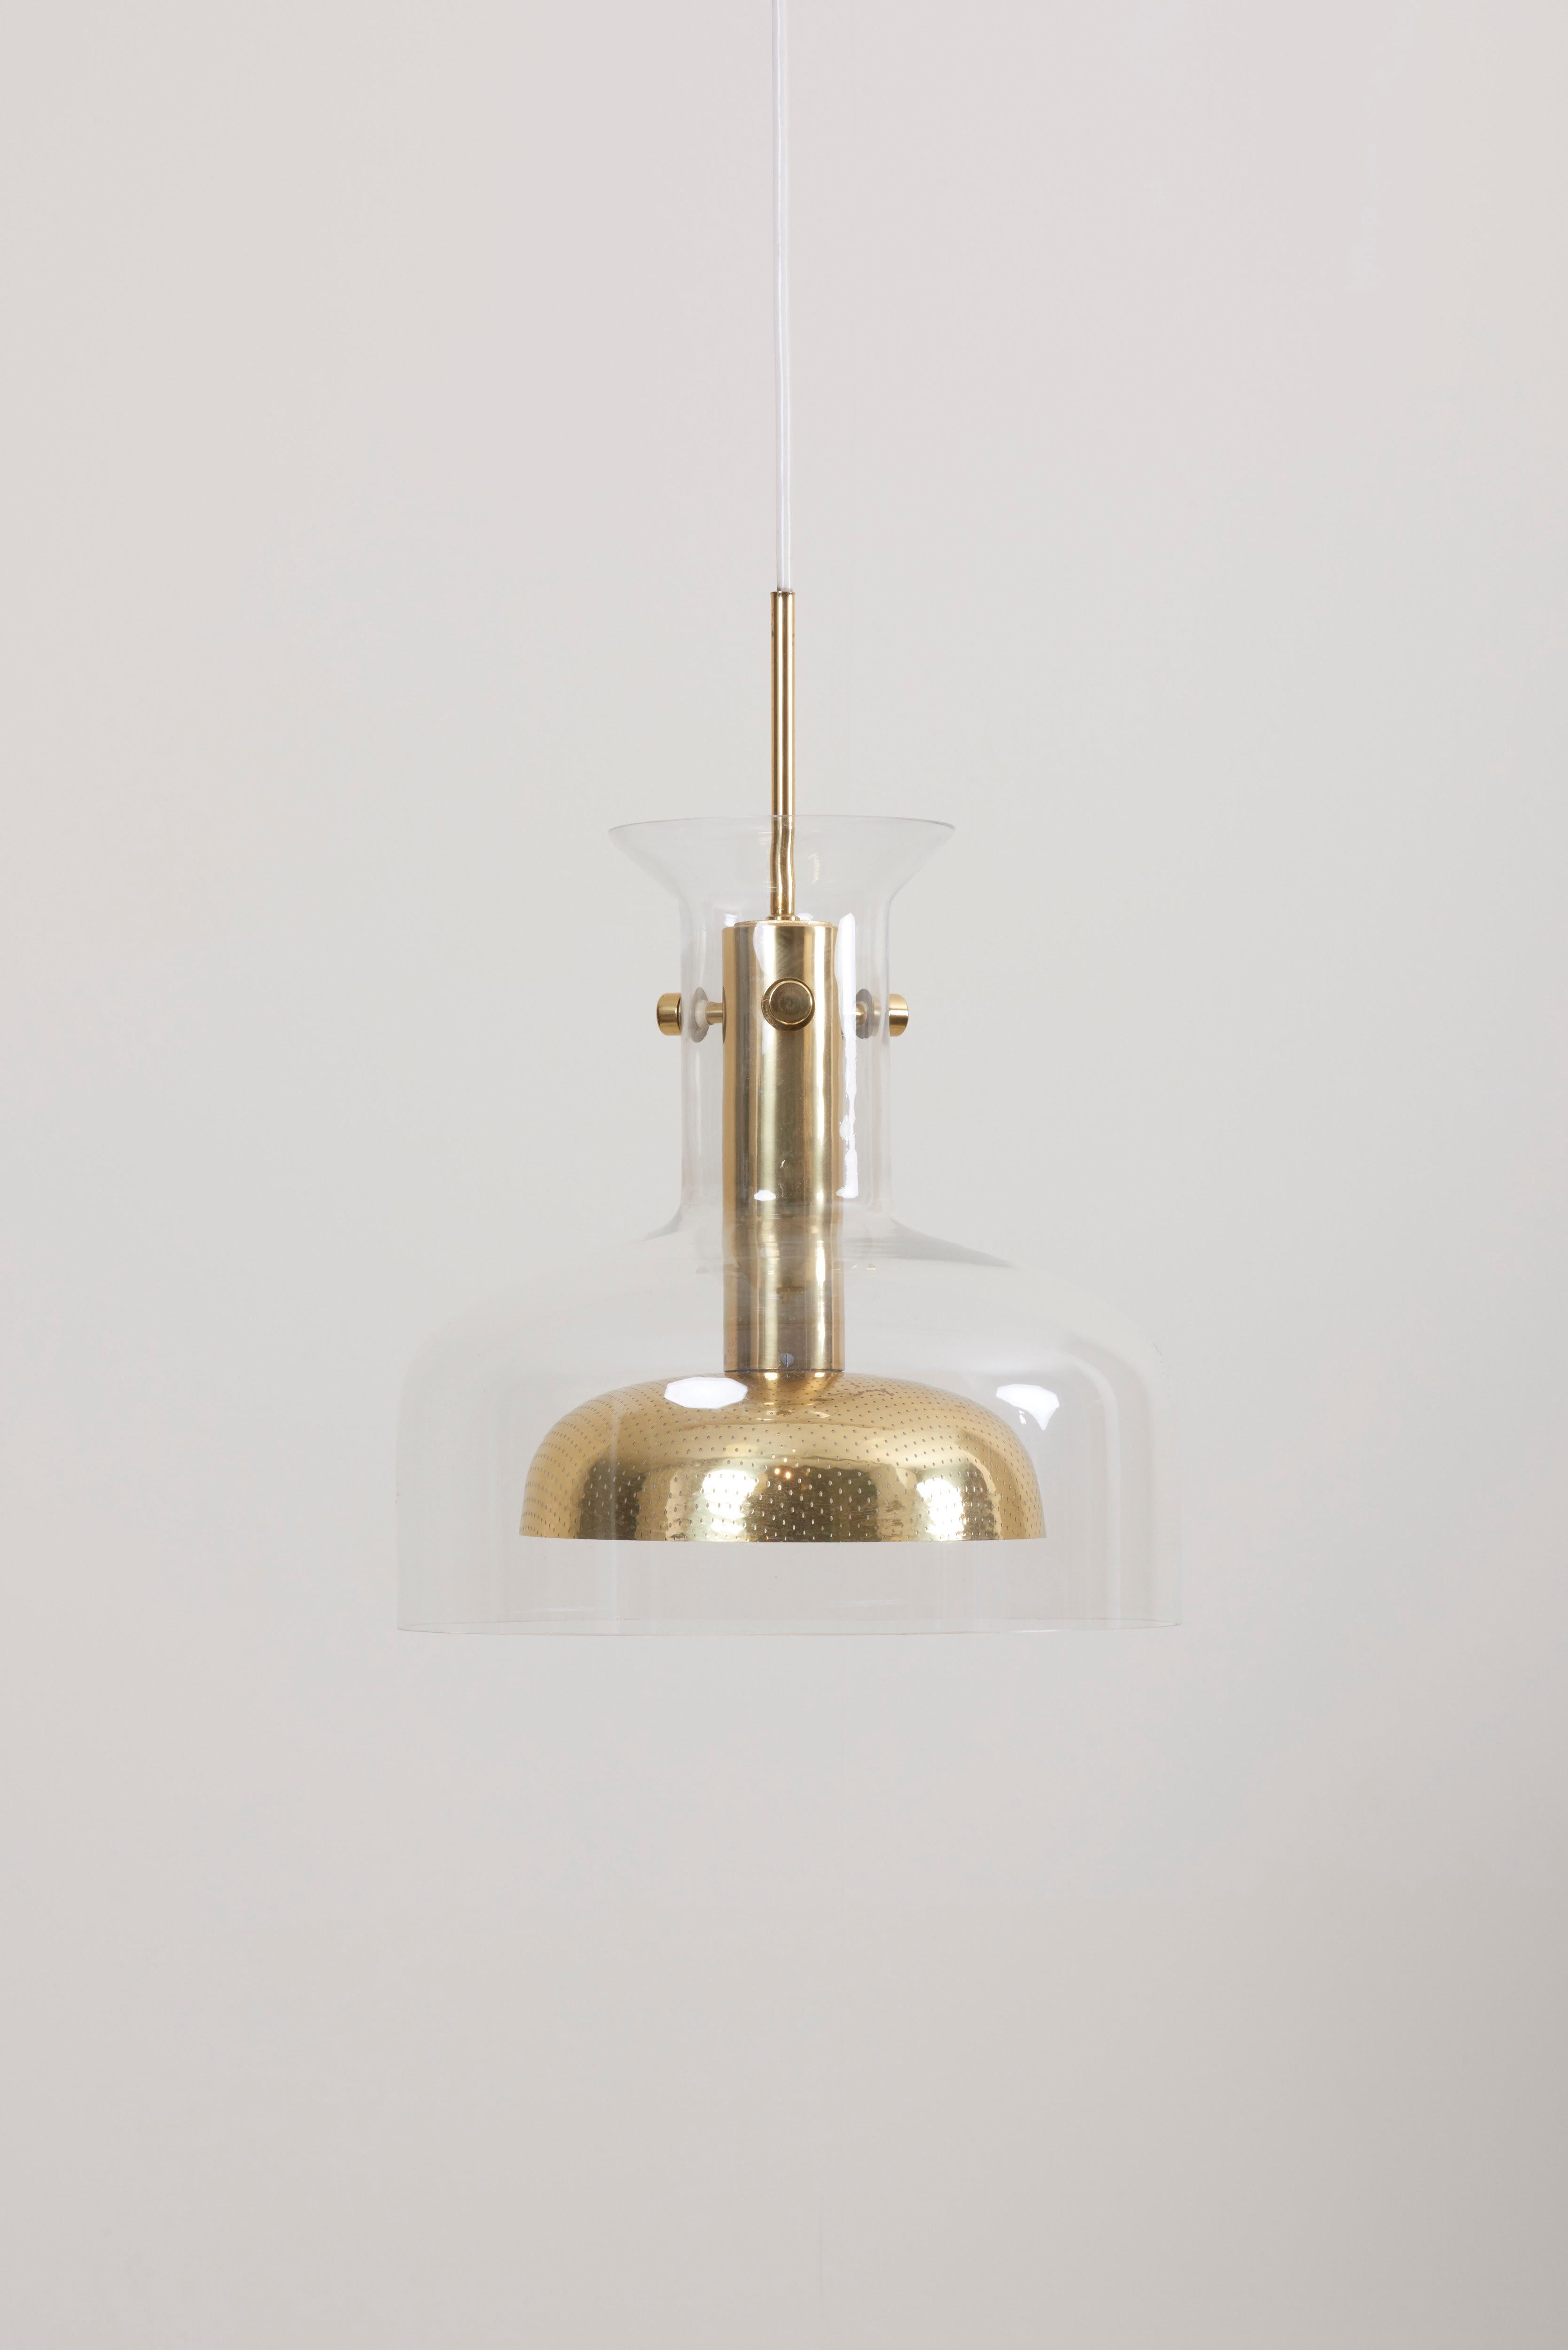 Excellent crystal pendants by Anders Pehrson for Ateljé Lyktan. One model A / E27 bulb.
To be on the safe side, the lamp should be checked locally by a specialist concerning local requirements.
We only have one piece available.